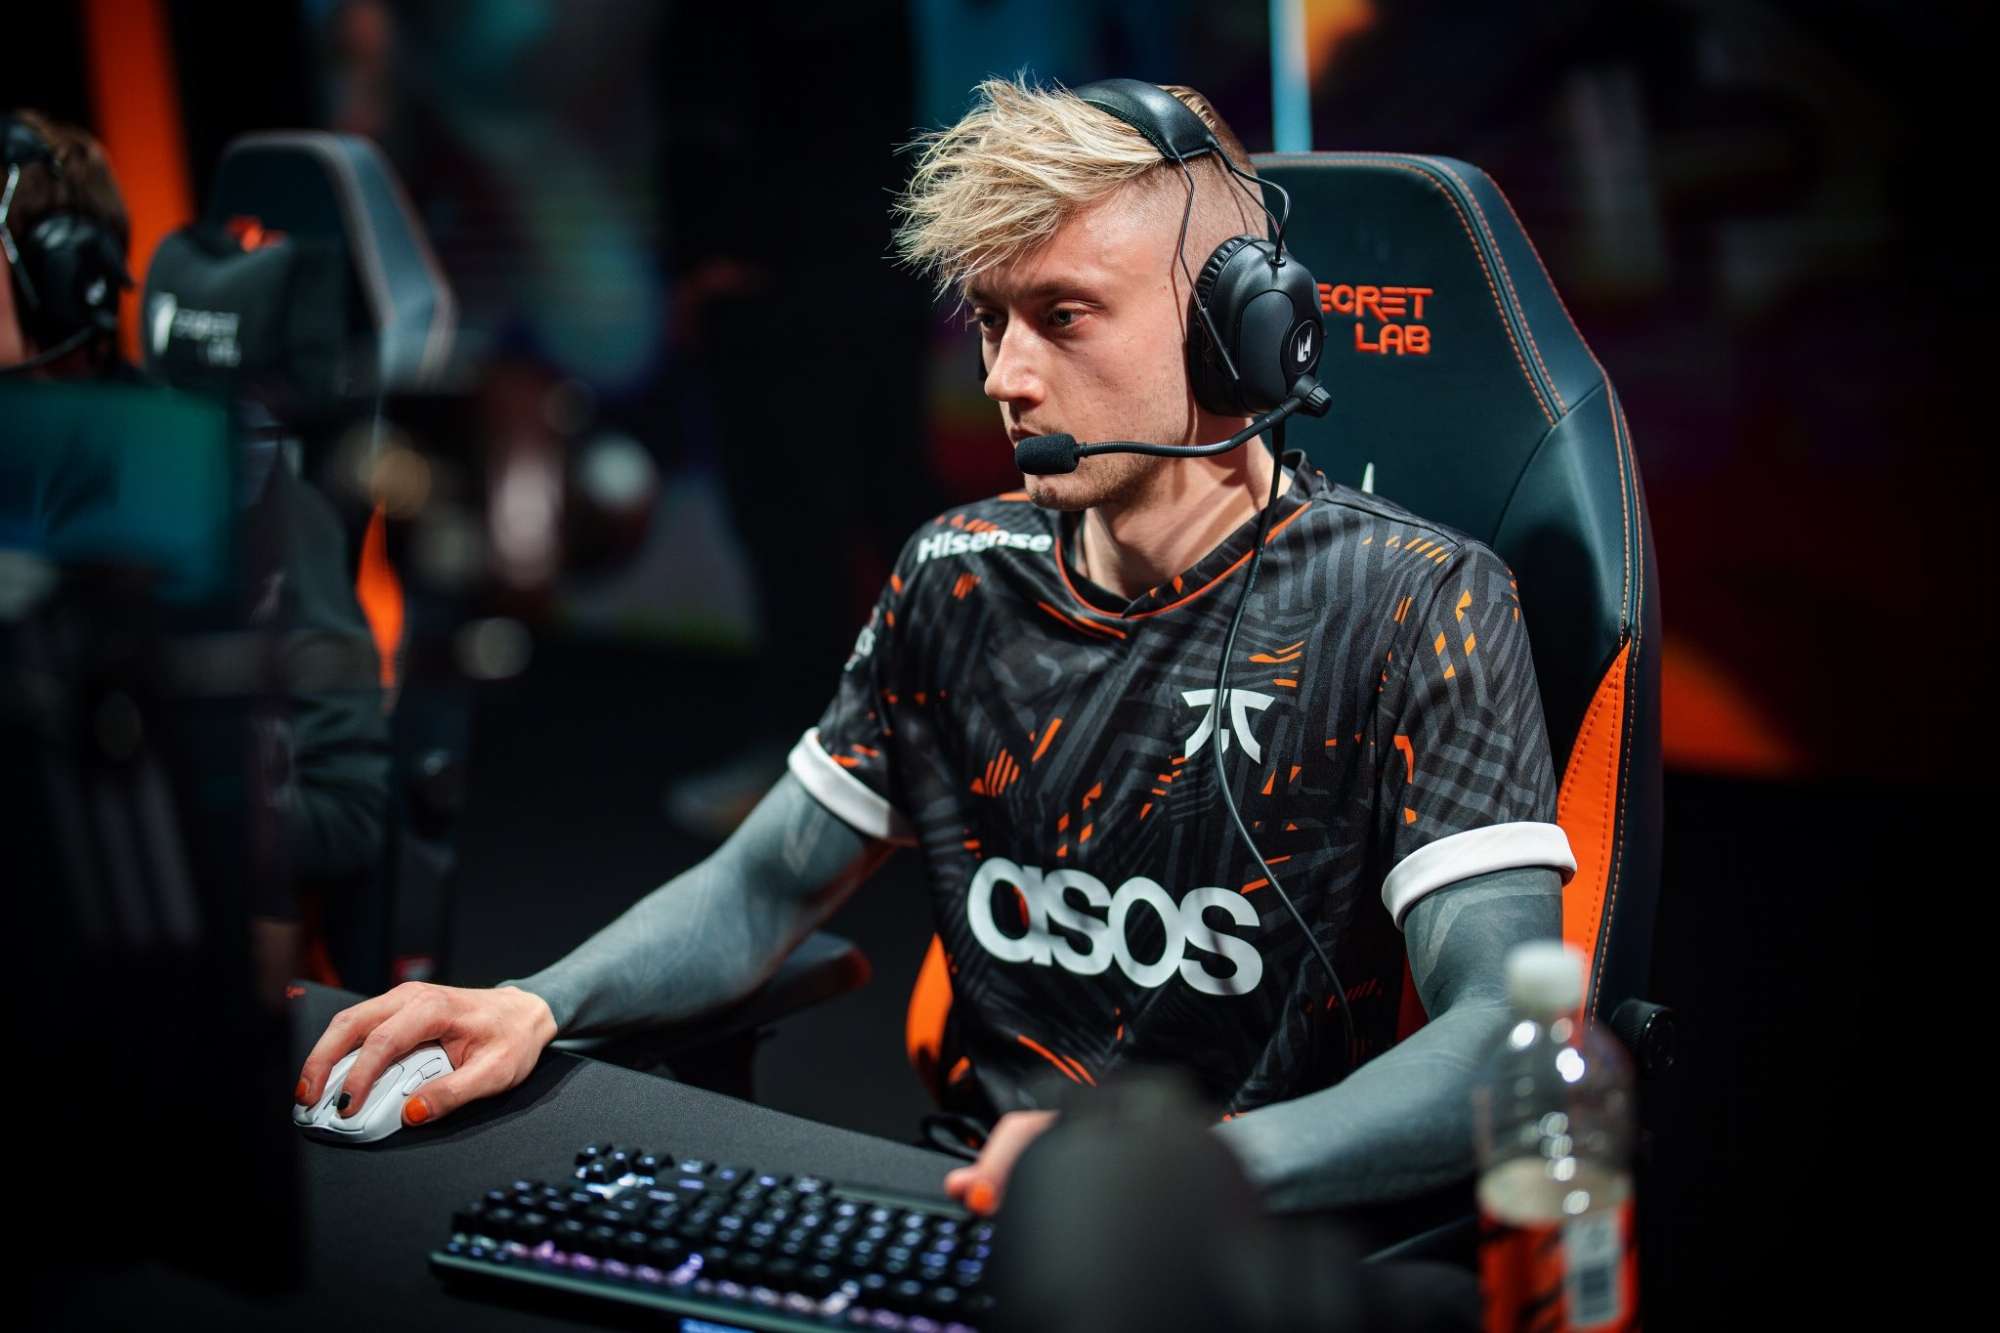 Just returned to the LEC, Rekkles and FNC had a chance of being eliminated from the ‘parking round’